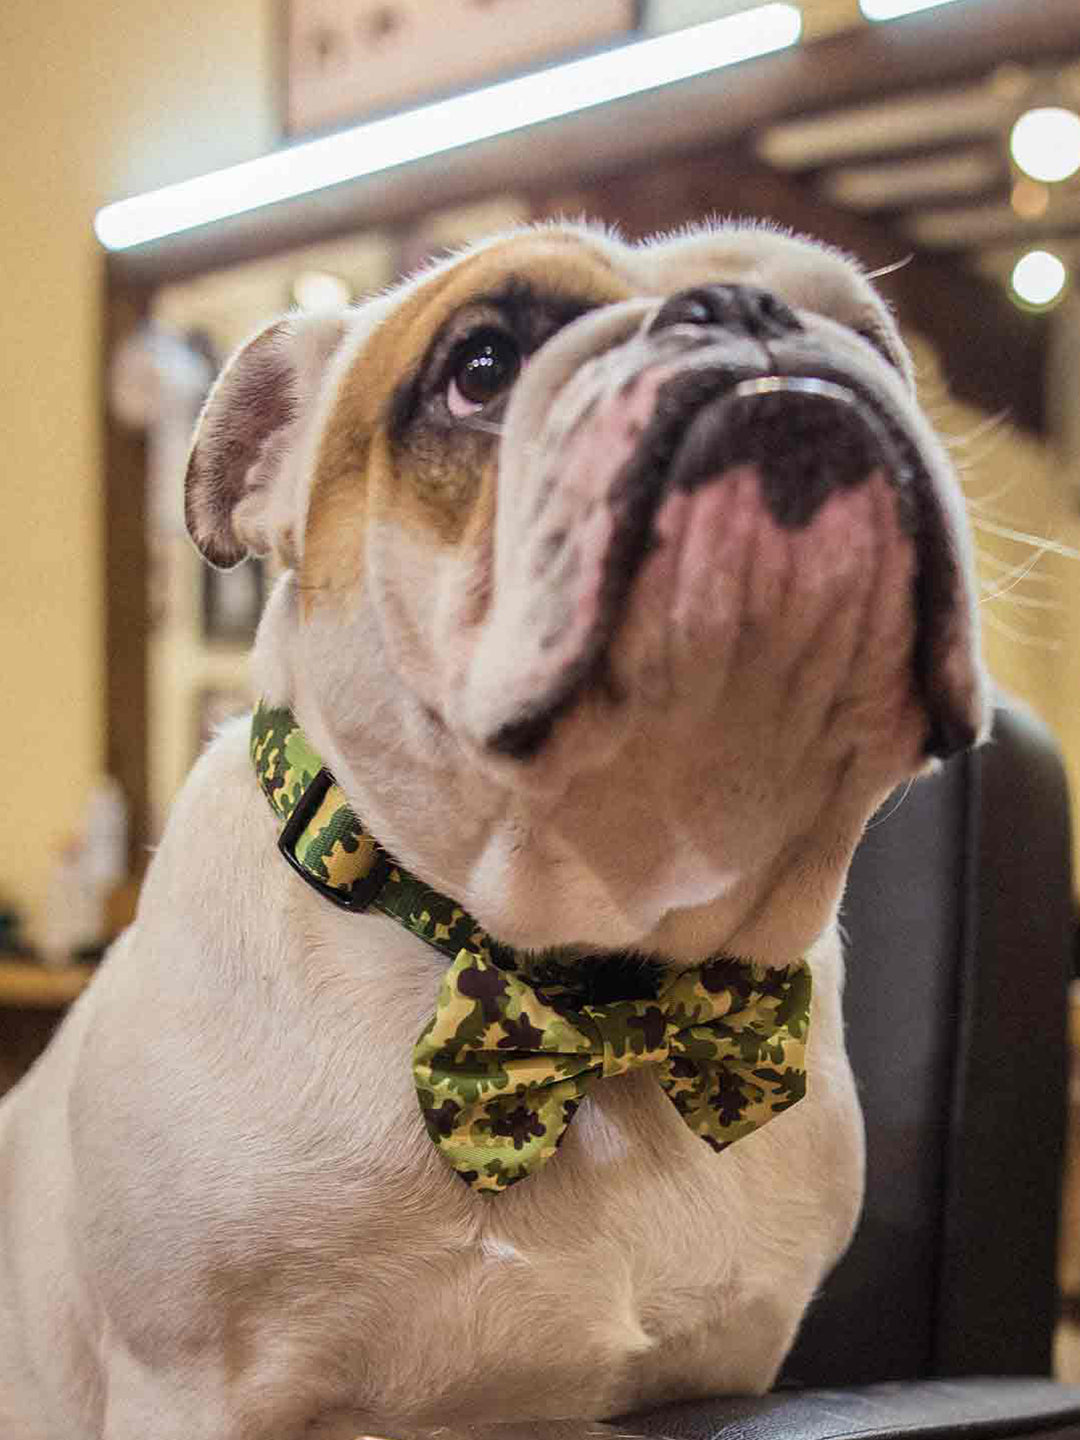 CAMO BOW TIE FOR DOGS